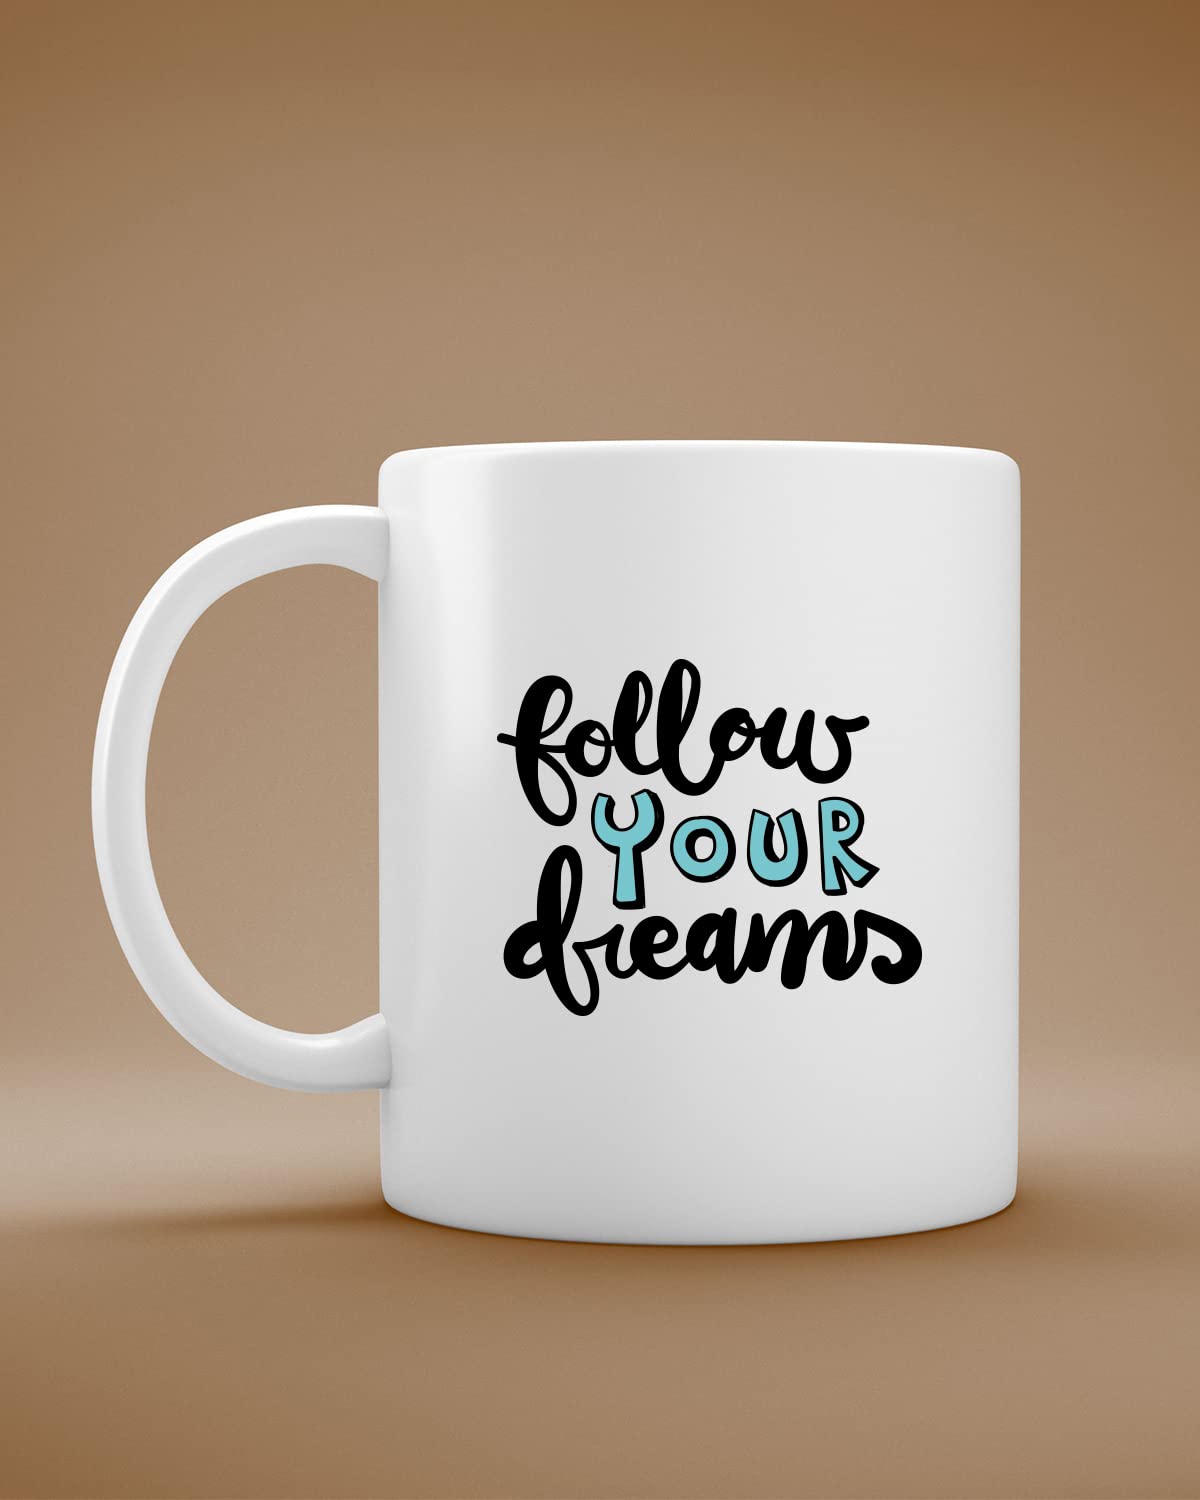 The Pink Magnet Follow Your Dreams Coffee Mug | Romantic Printed Coffee Mug for Birthday,Anniversary Gift,Valentine's Day Gift, for Someone Special Inspirational thoughts | inspiring gifts for boyfriend |Inspirational quotes Printed coffee